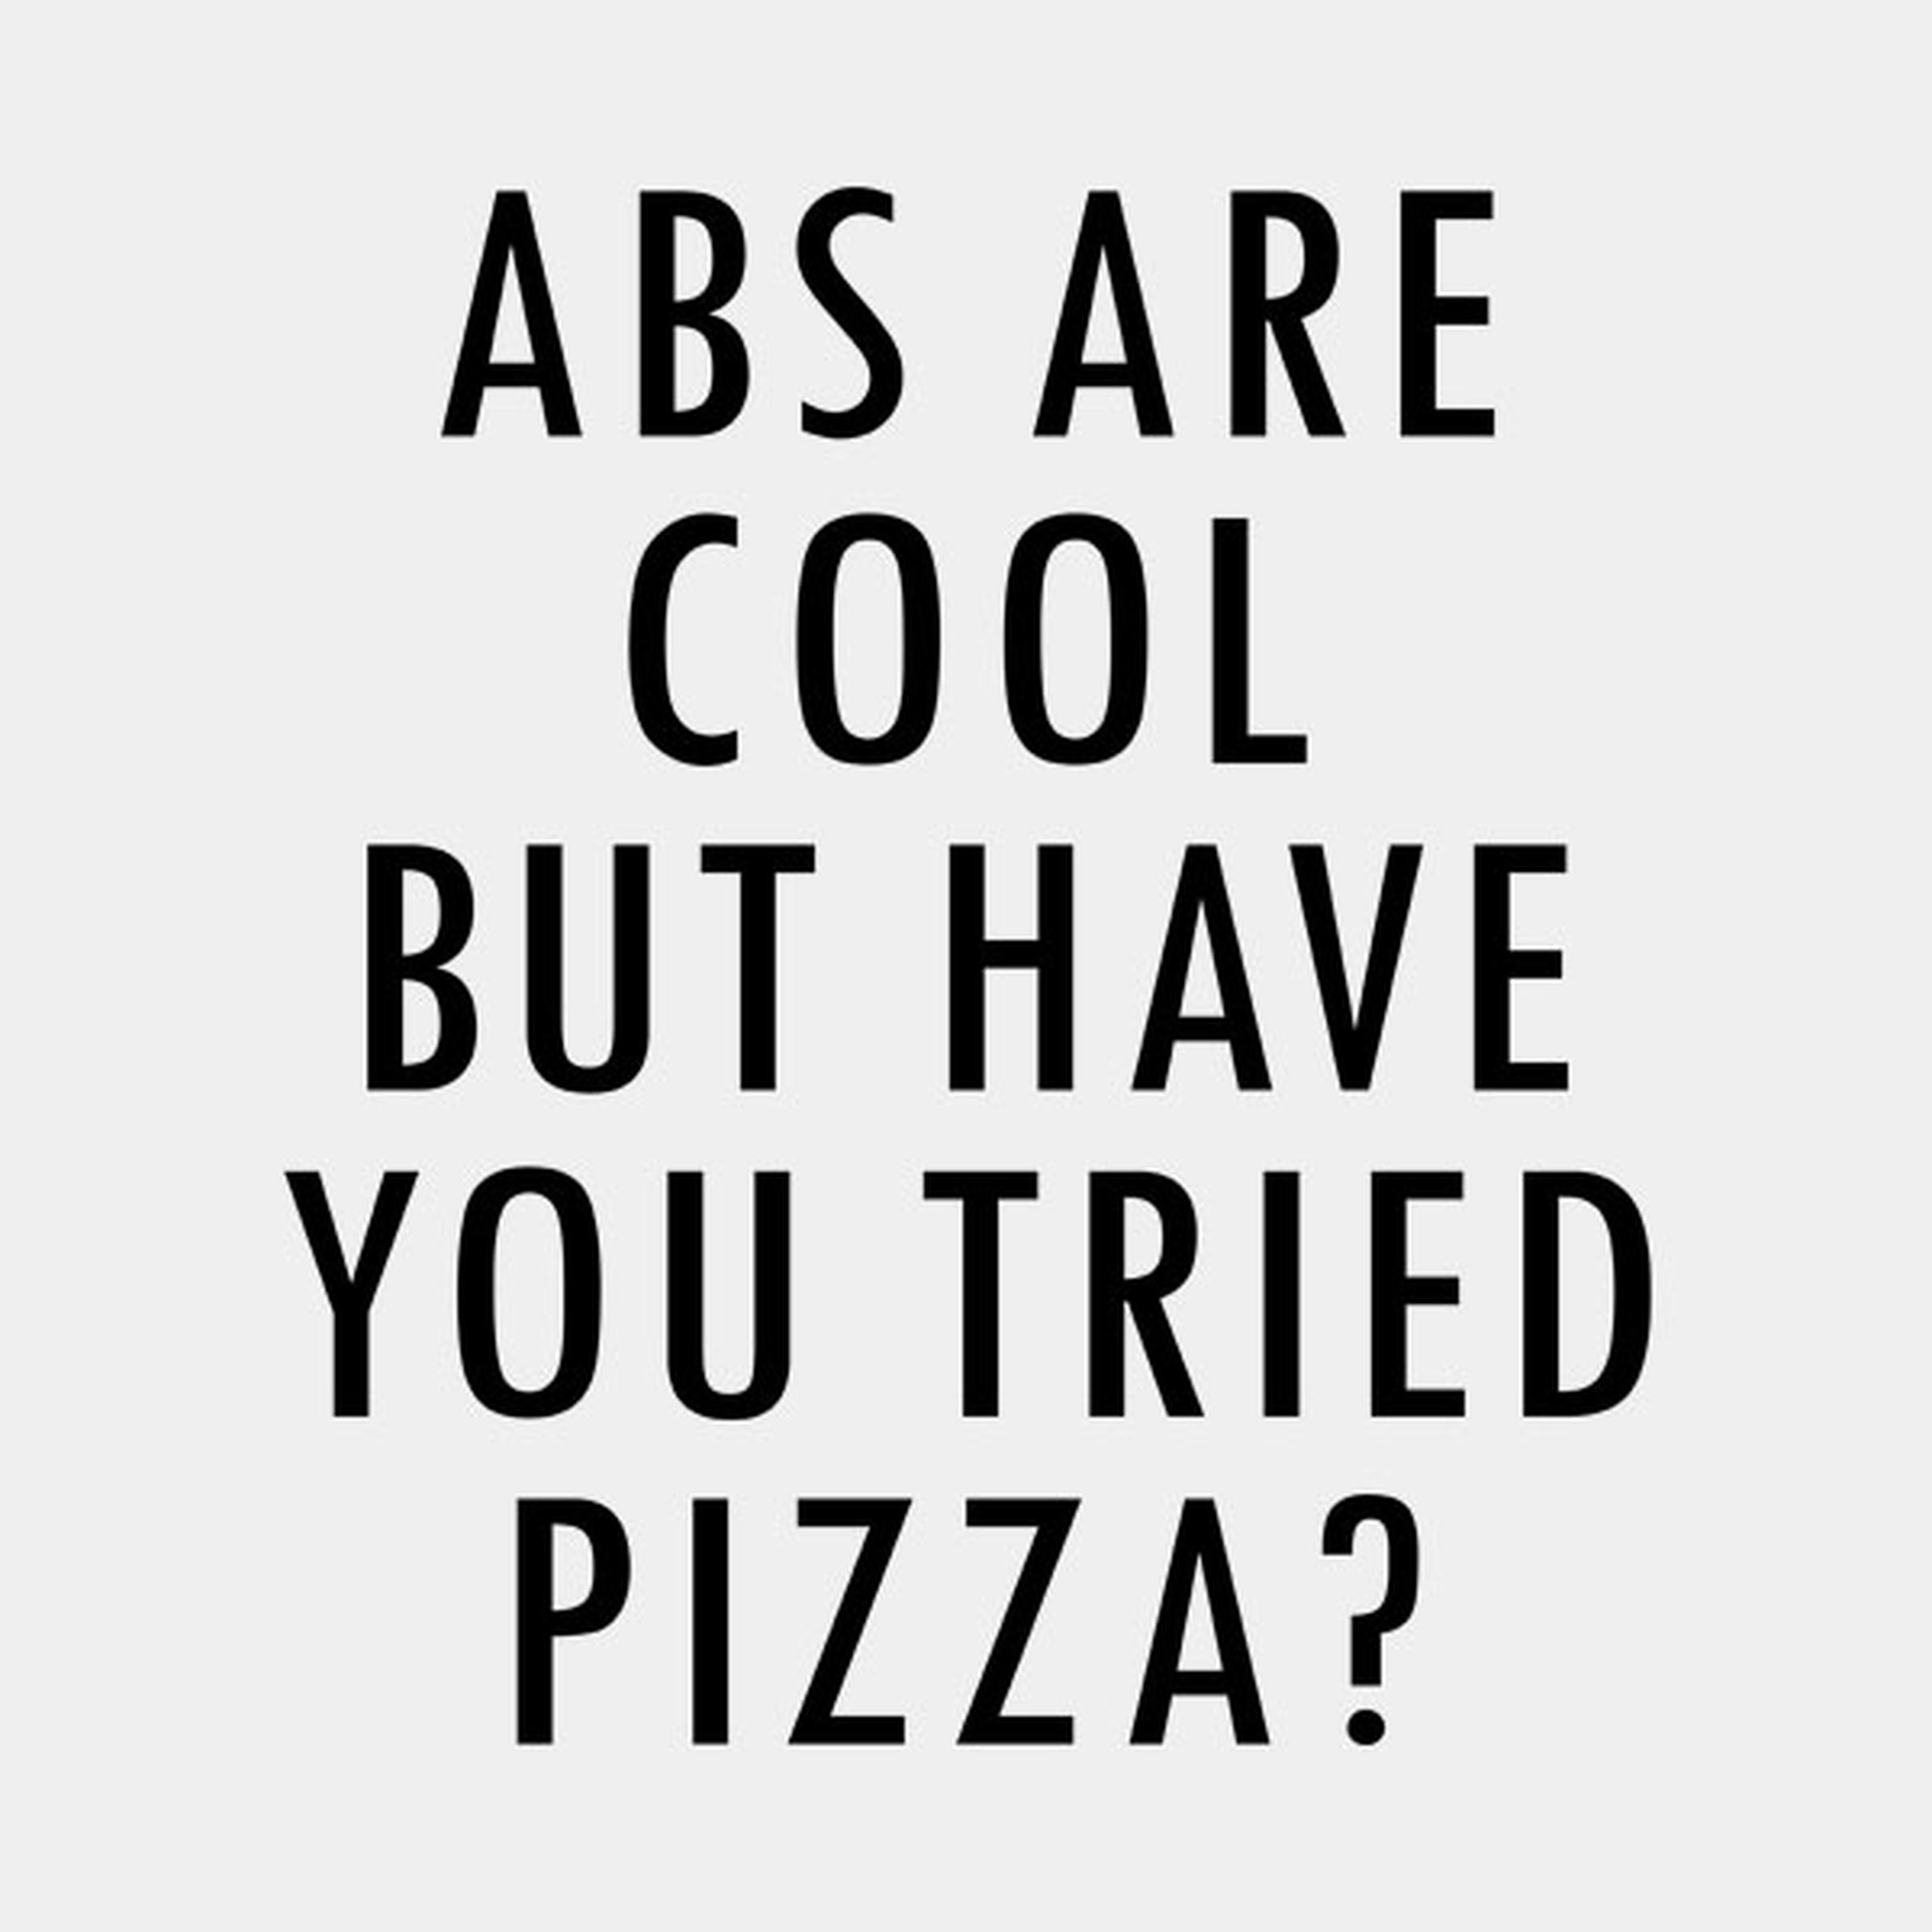 ABS are great but have you tried pizza? - T-shirt